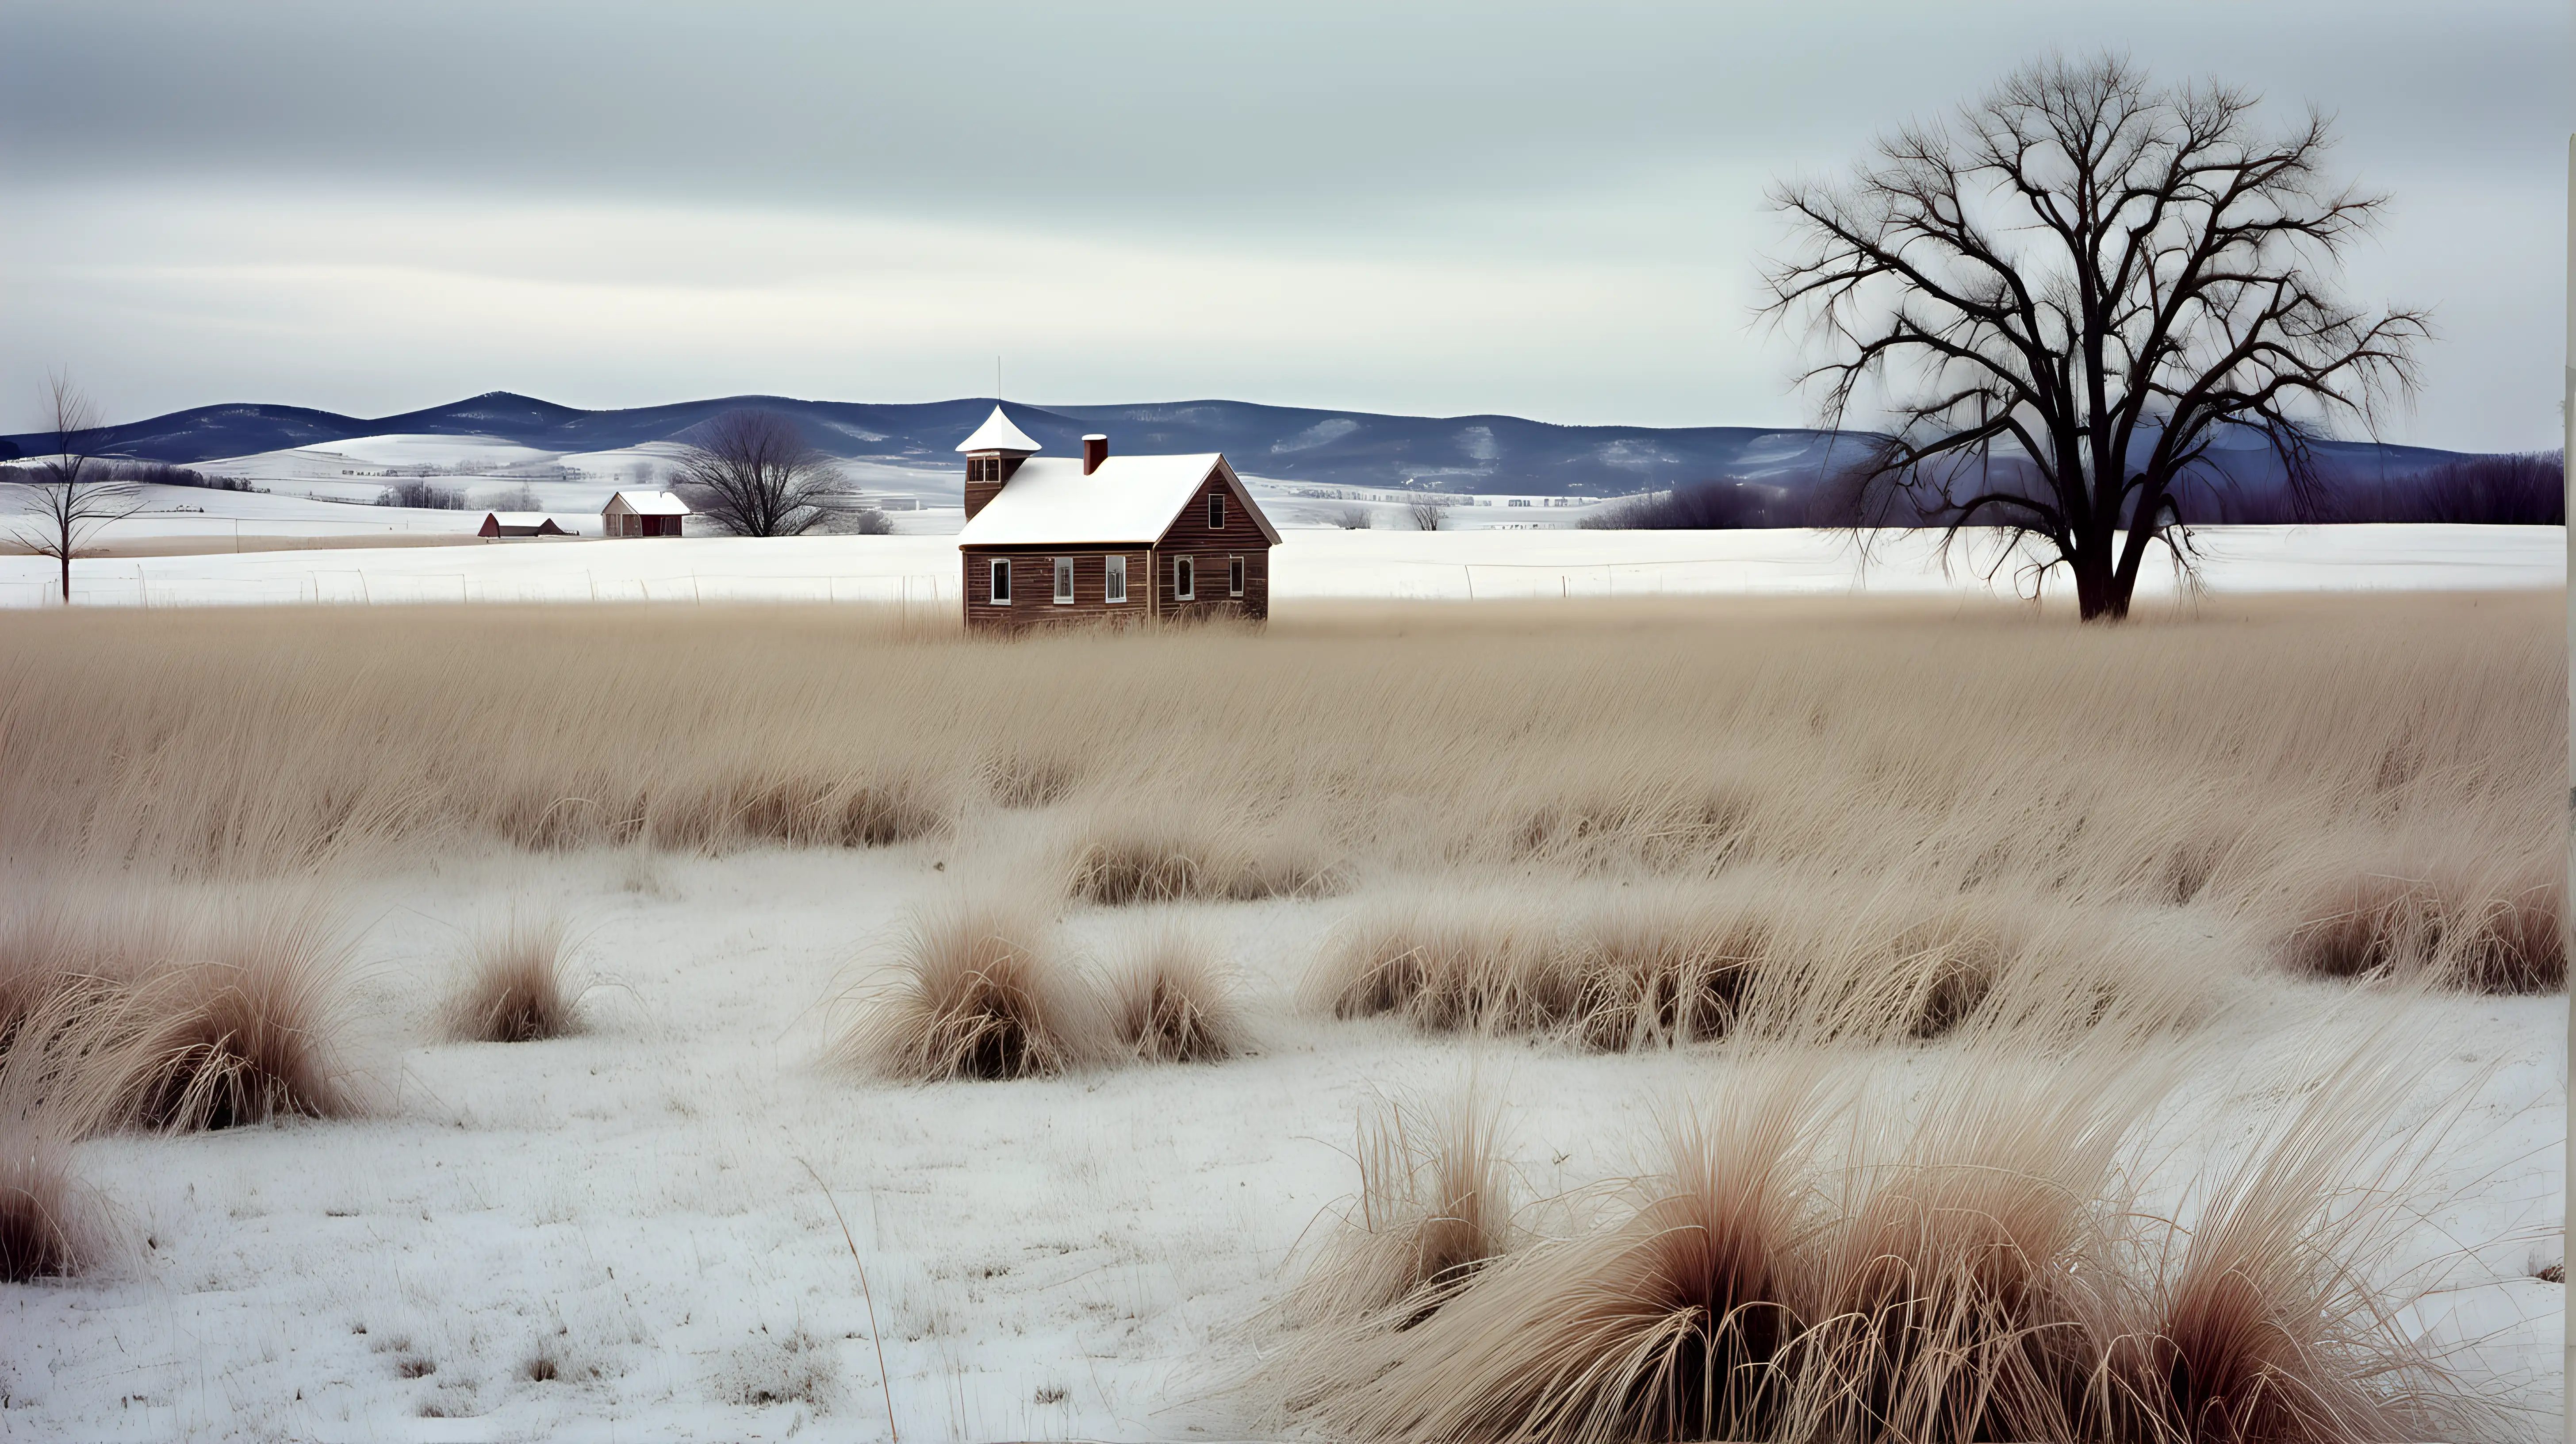 Photograph of a meadow in winter with tall prarie grass, trees and hills in the distance, and an old country one-room schoolhouse in the distance. Photographic quality, high resolution.